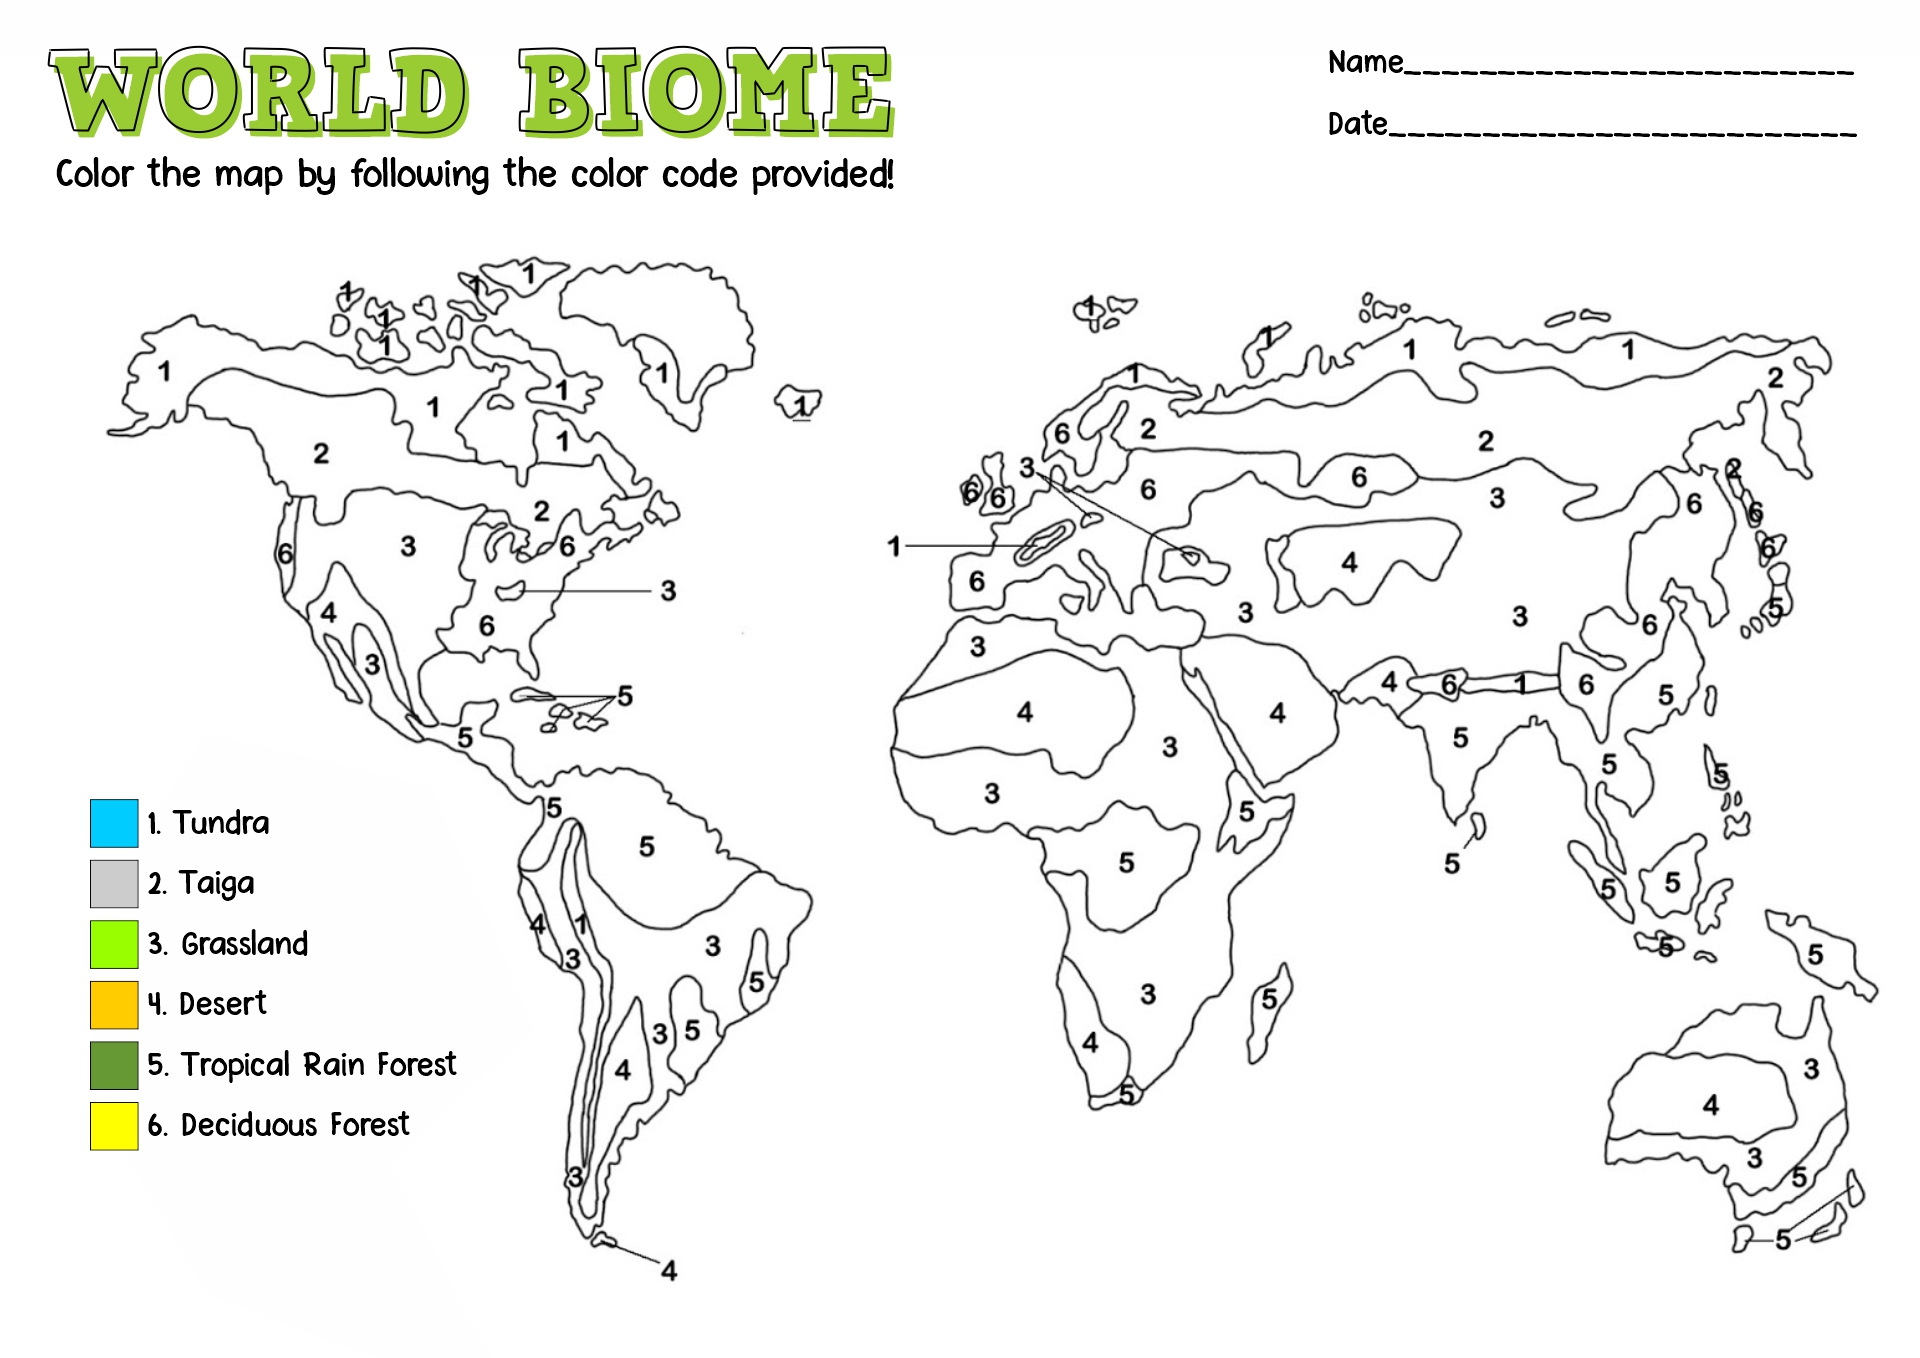 World Biome Map Coloring Page